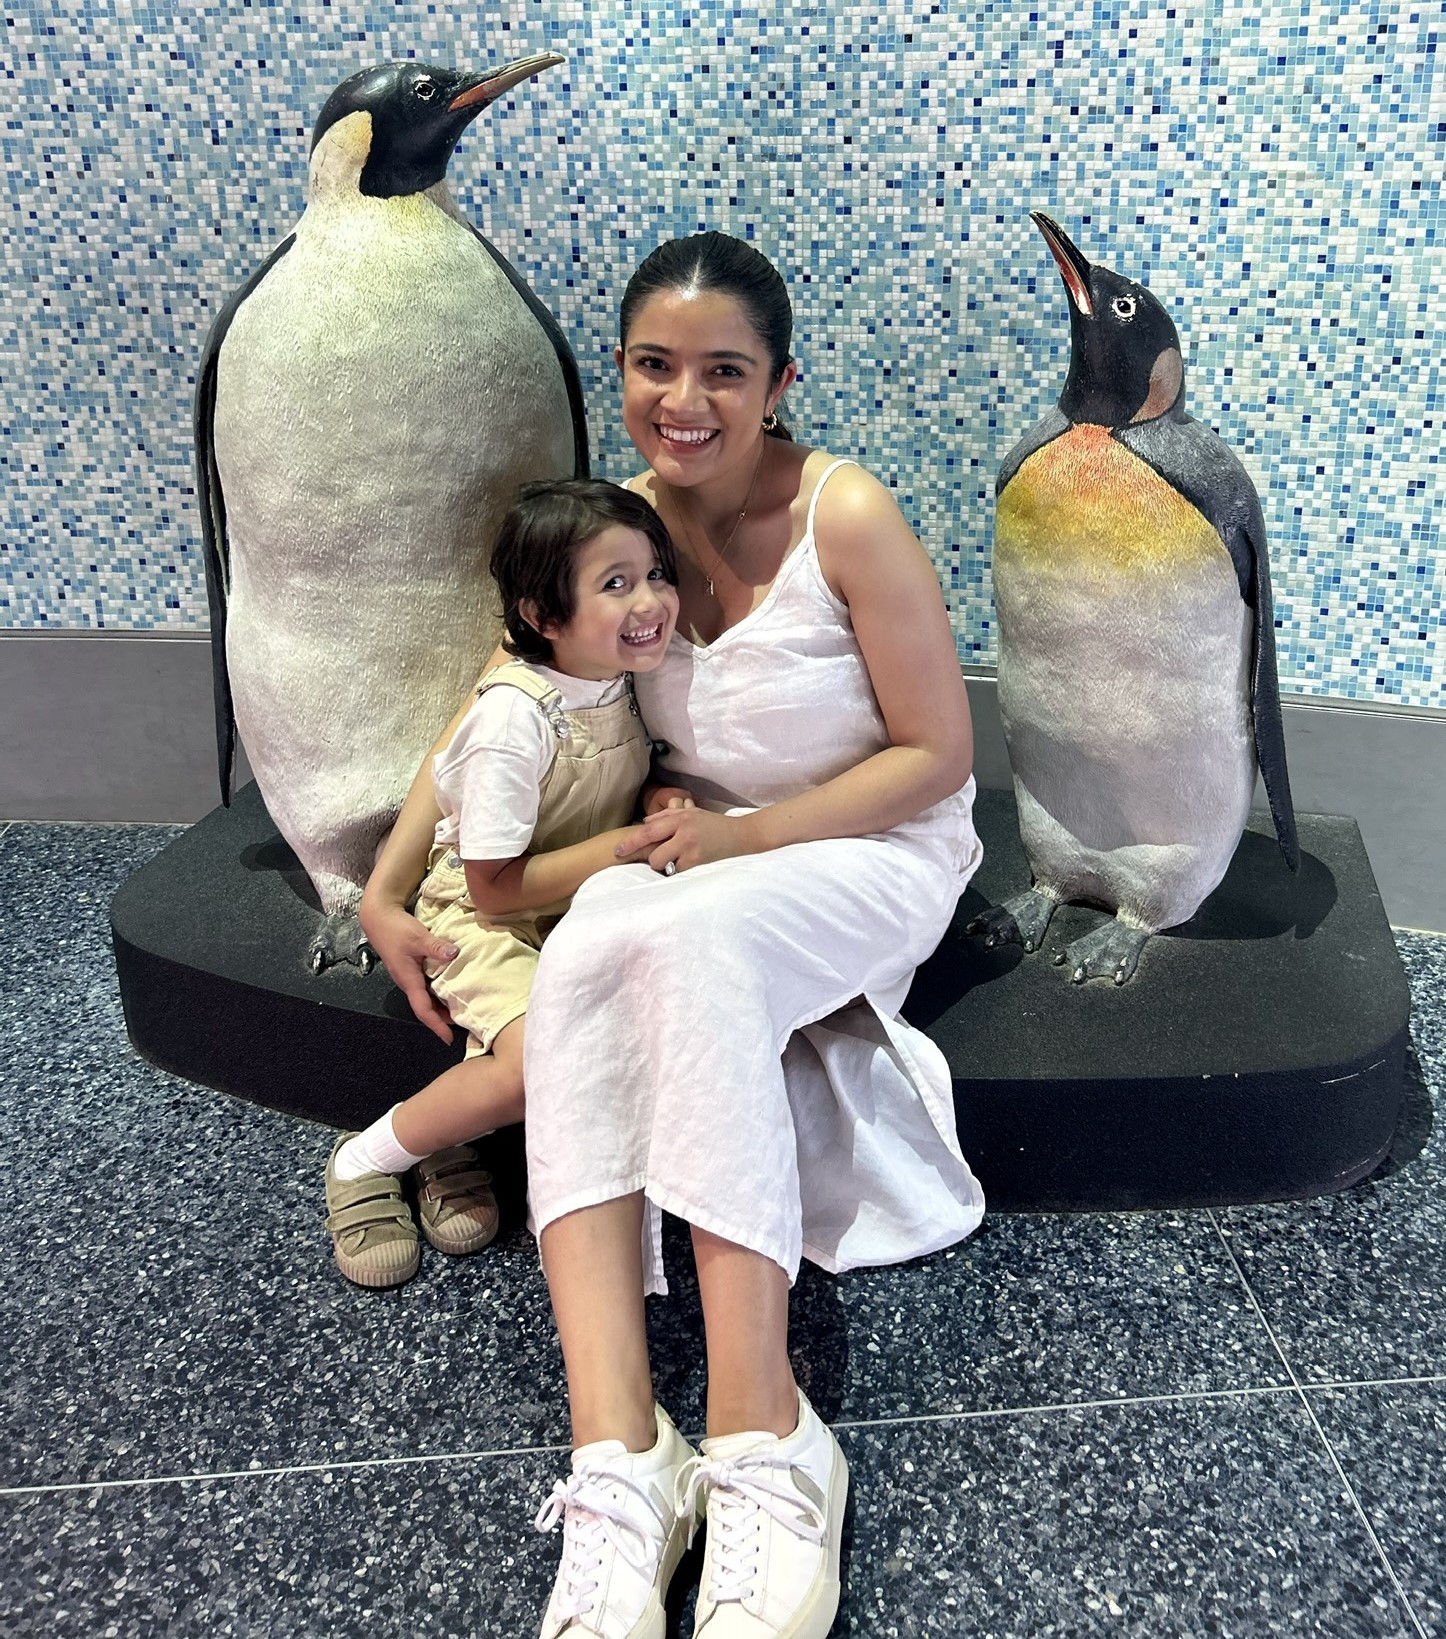 Lizeth sits at an aquarium with her son and flanked by statues of two penguins.